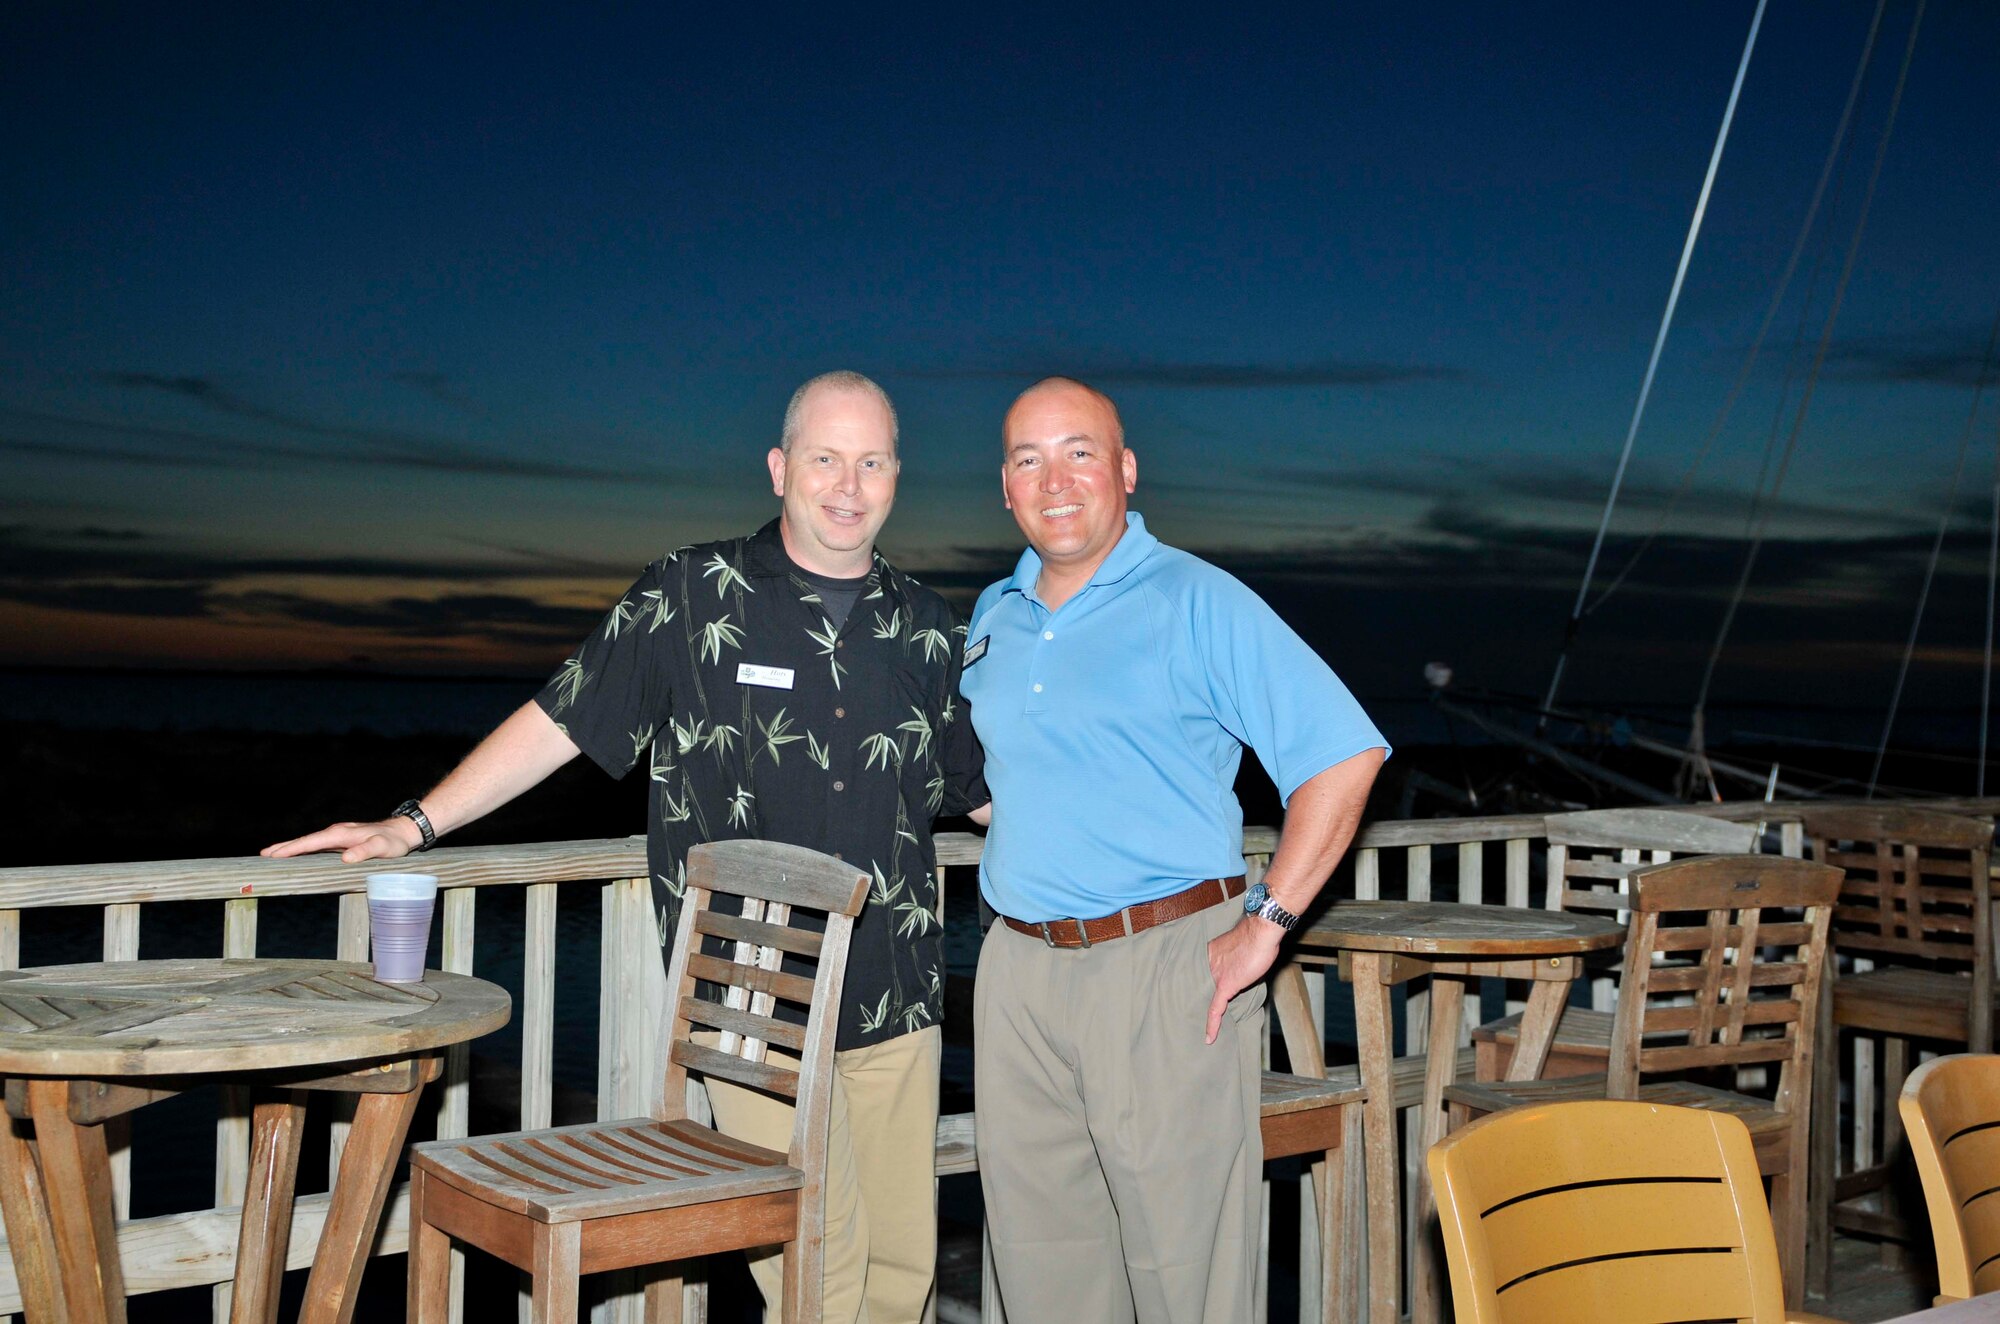 Chief Master Sgt. Jim Hotaling (left), Air Forces Northern command chief, and Chief Master Sgt. Mitchell Brush spend time together during the social outing for the AFNORTH Commander’s Conference at Tyndall Air Force Base, Fla., March 20. Chief Brush passed responsibility of the command’s enlisted force to Chief Hotaling during a transfer of authority ceremony at Tyndall March 23. (U.S. Air Force photo by Susan Trahan) 